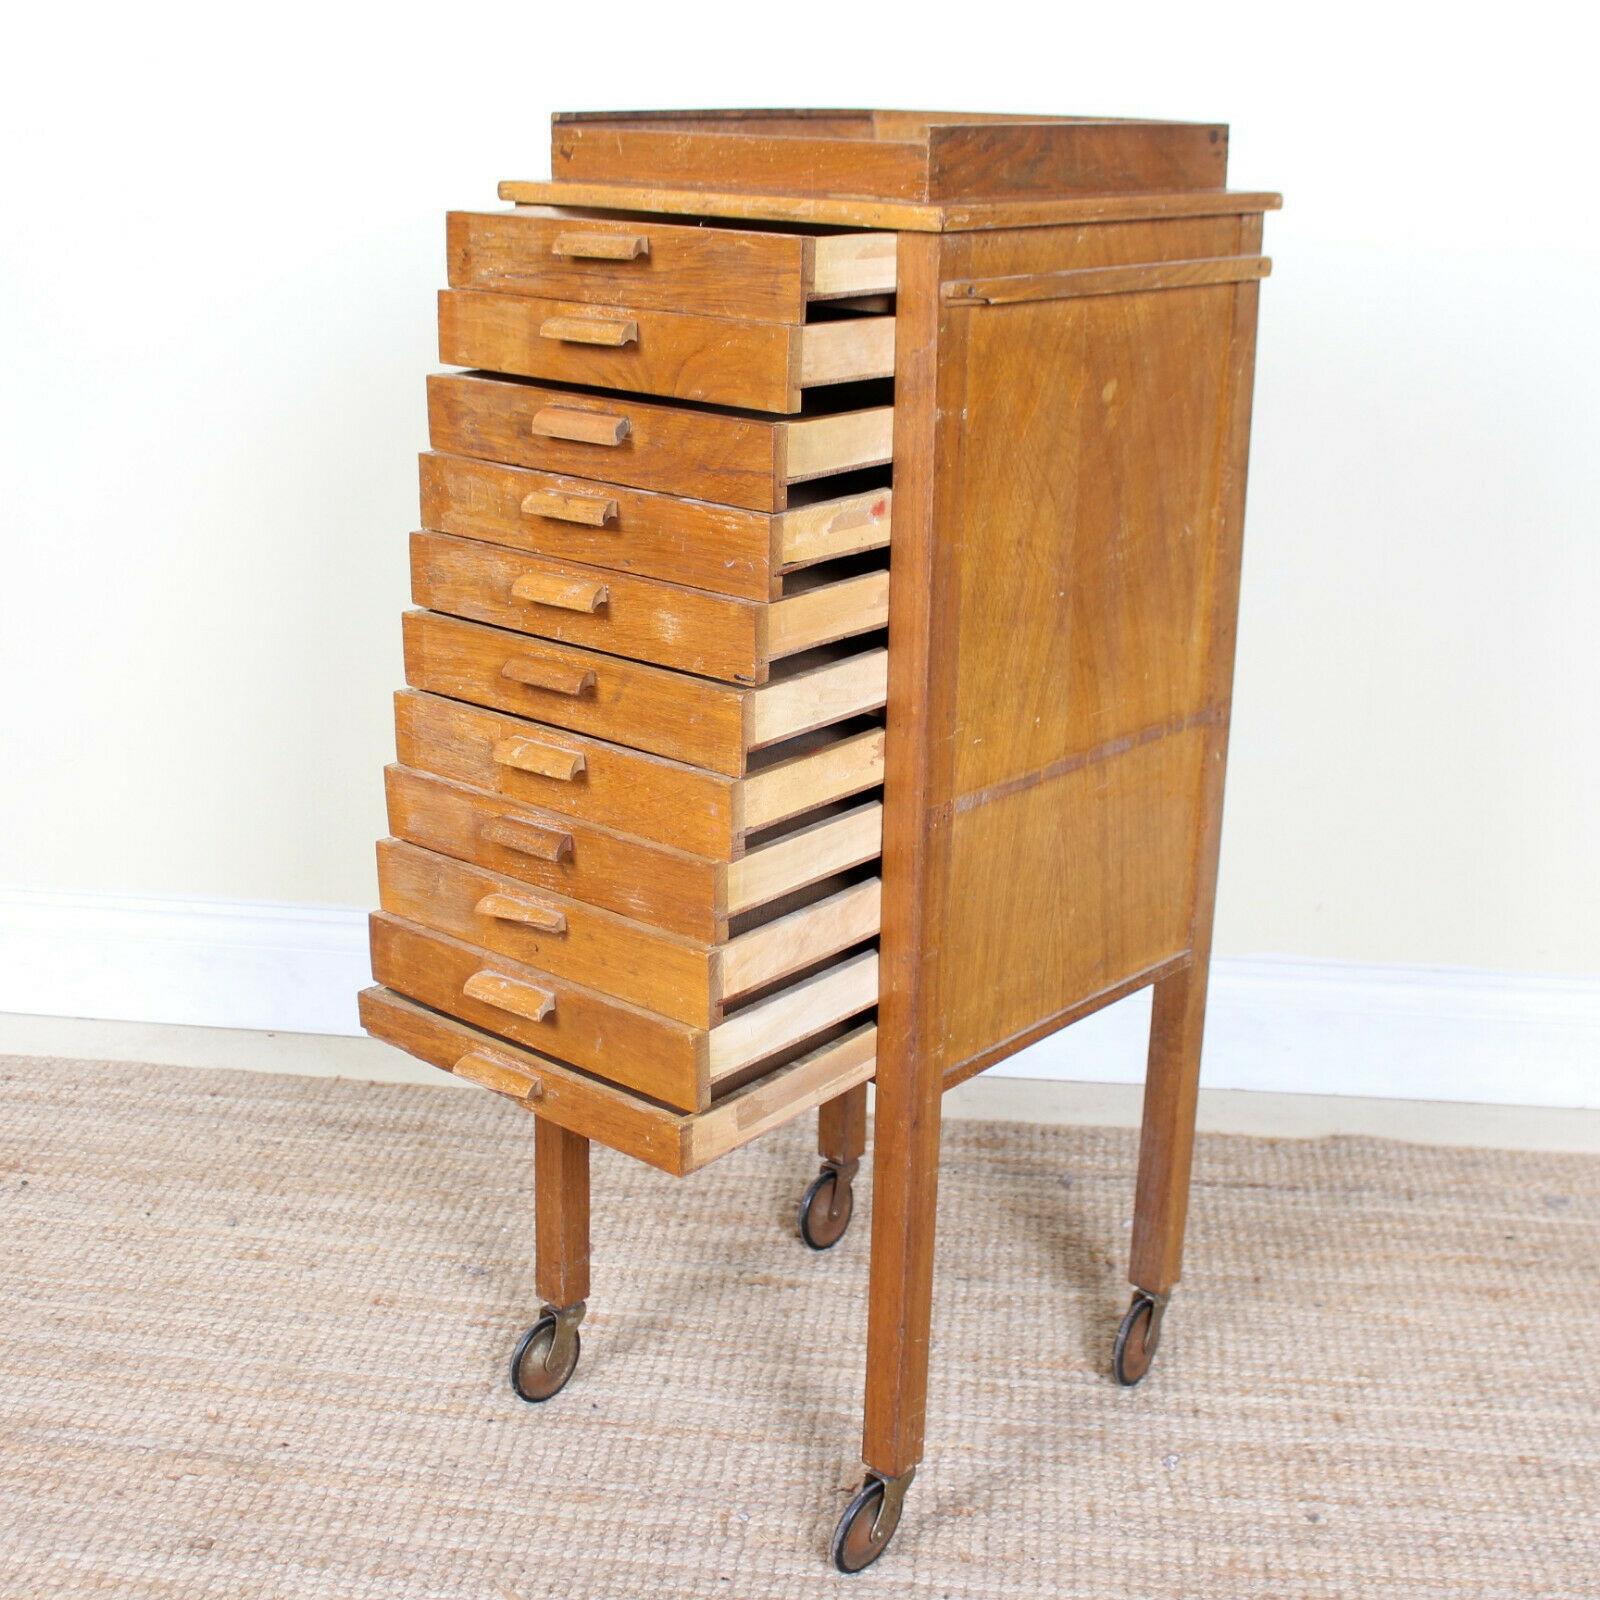 An impressive rare form early 20th century portable oak chest of drawers.
The graduated shallow oak drawers raised on square legs terminating in castors.
Lightly worn and imperfections to drawer fronts handles from age and use, England, circa 1920.